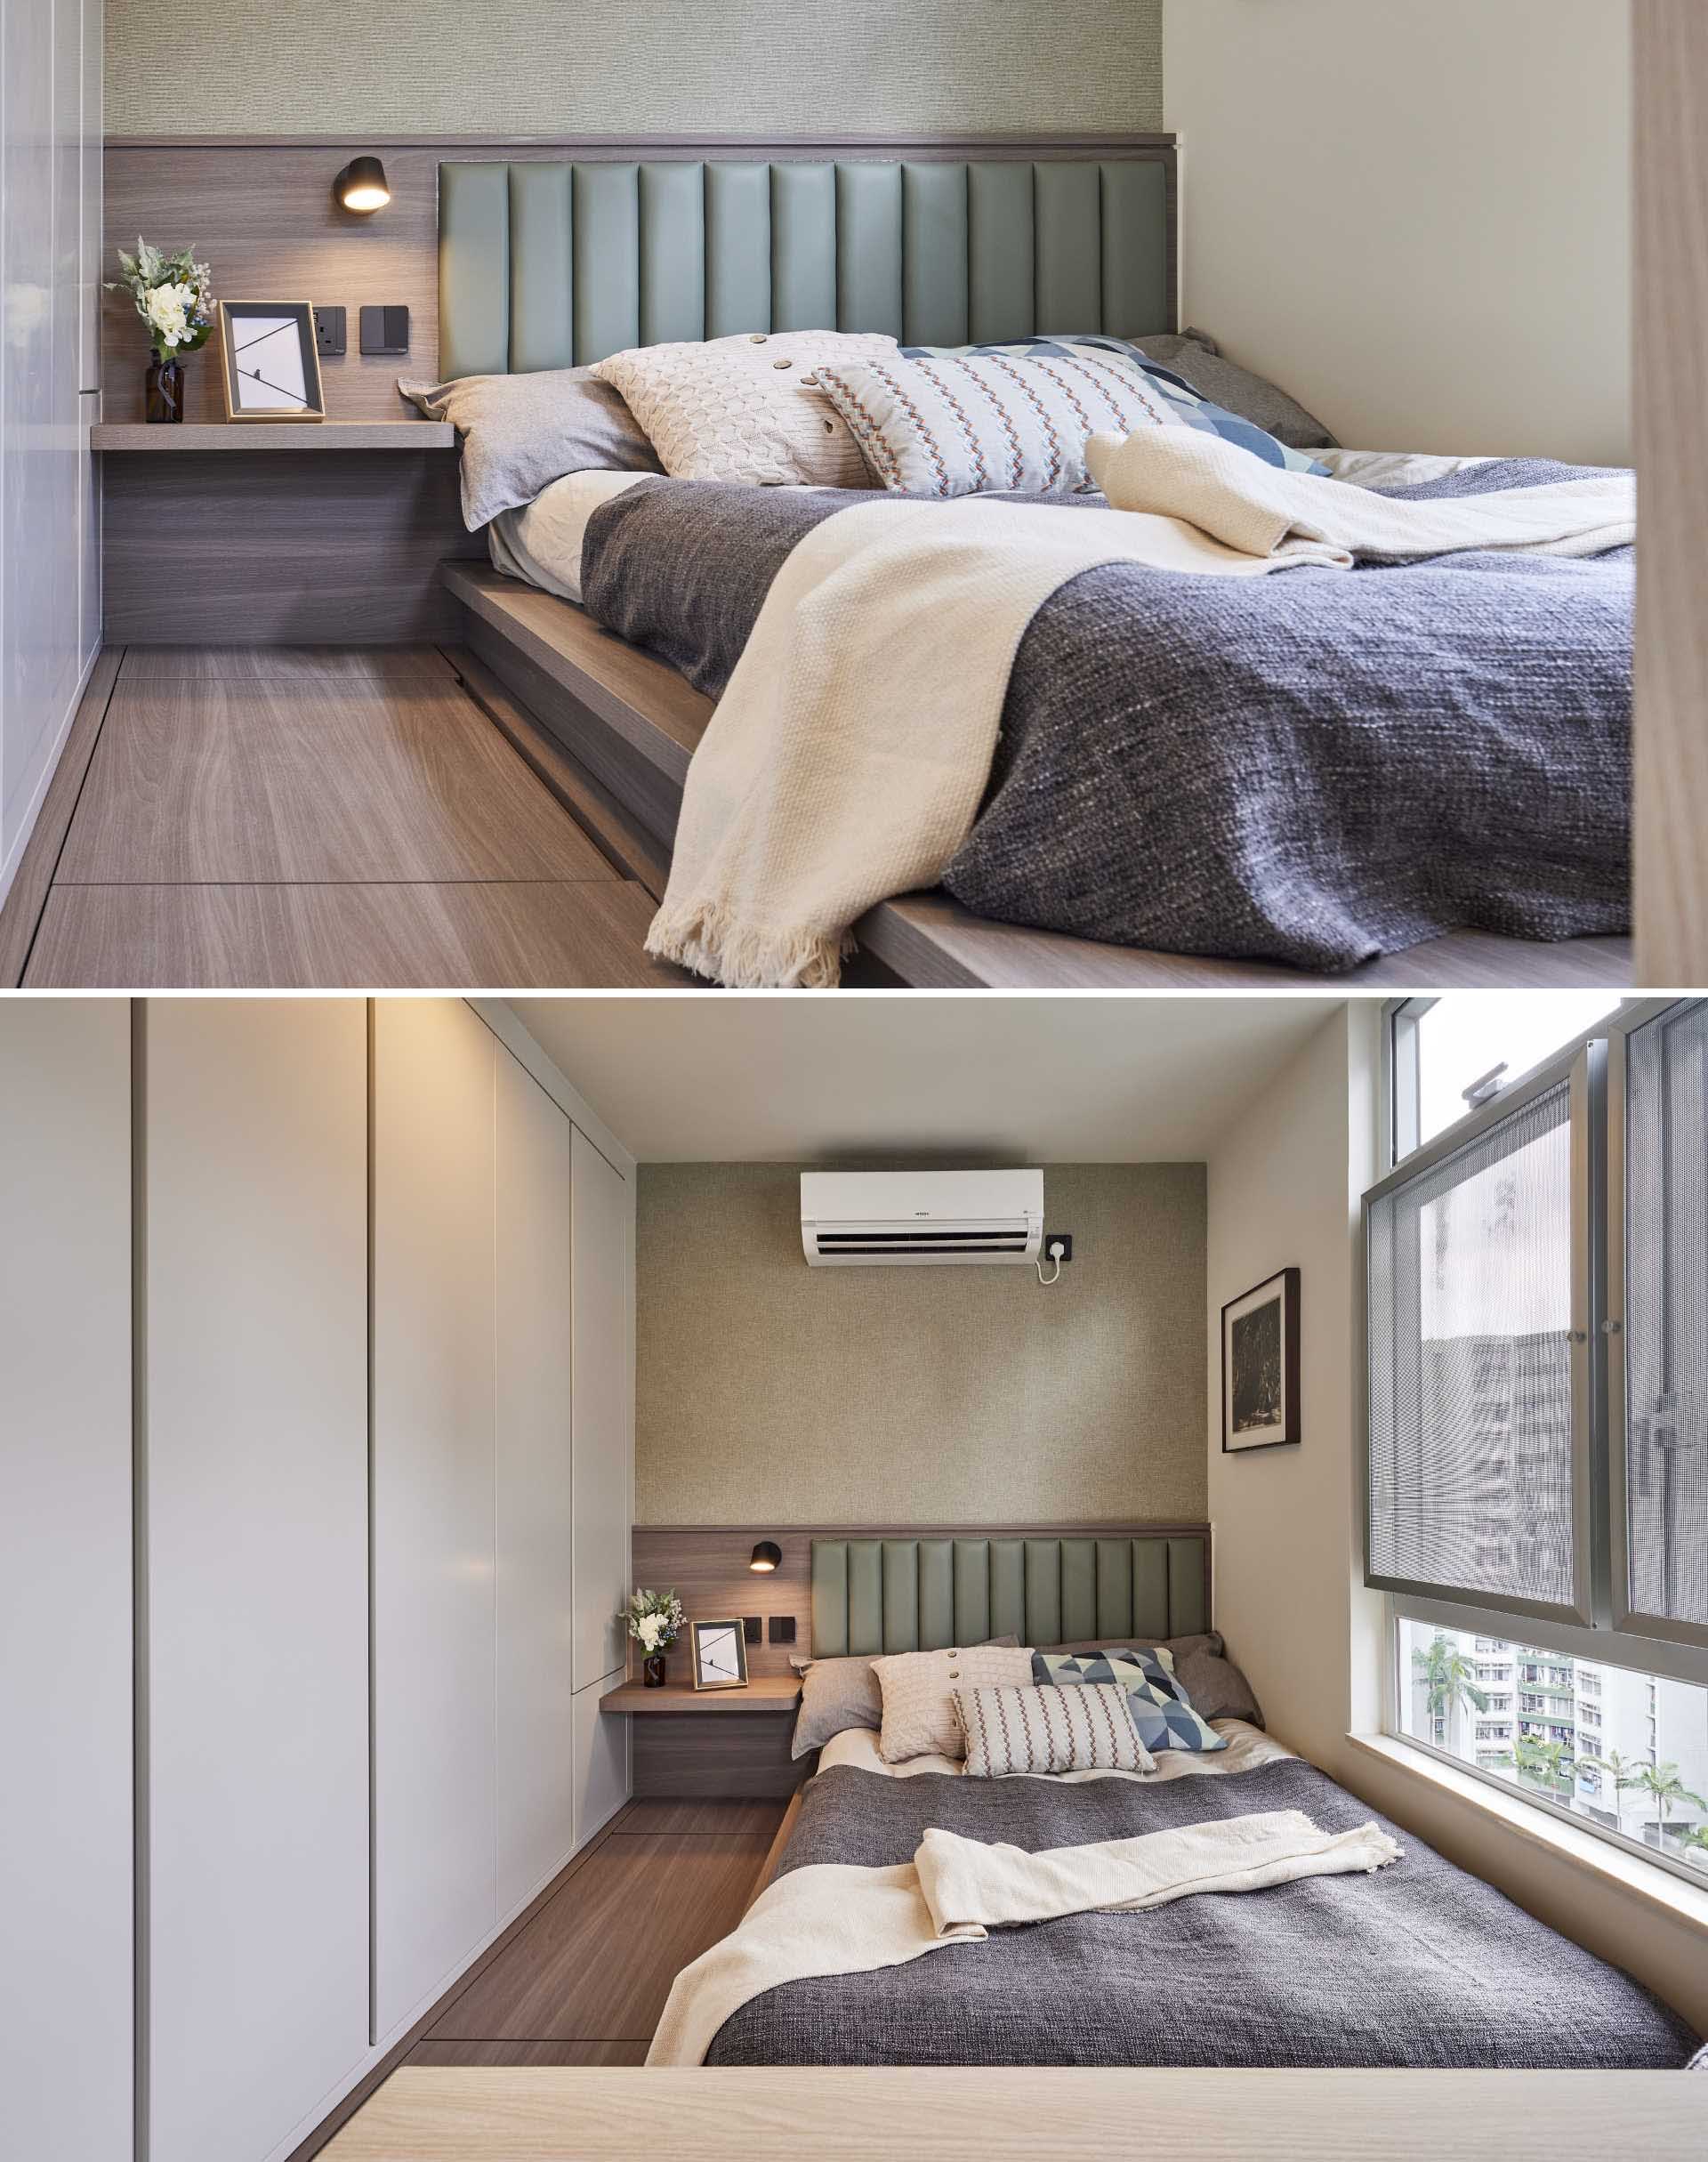 This small bedroom includes a built-in bed frame and bedside table with a green leather headboard, textured wallpaper, a wall of storage. There's also additional storage within the bed platform.